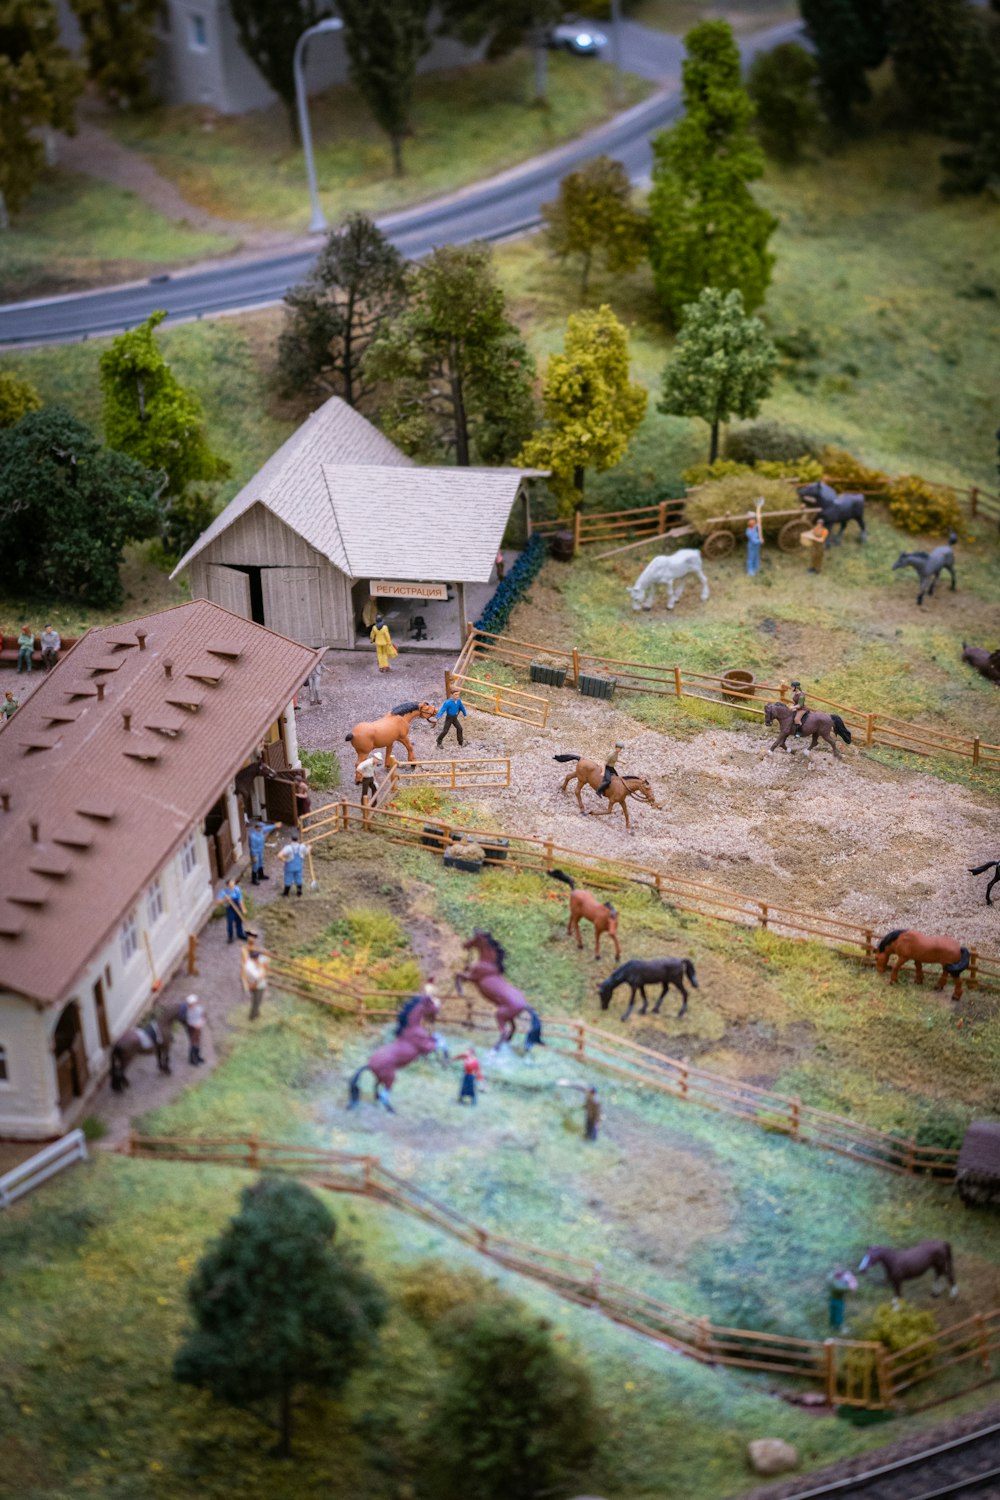 a model of a farm with horses and people